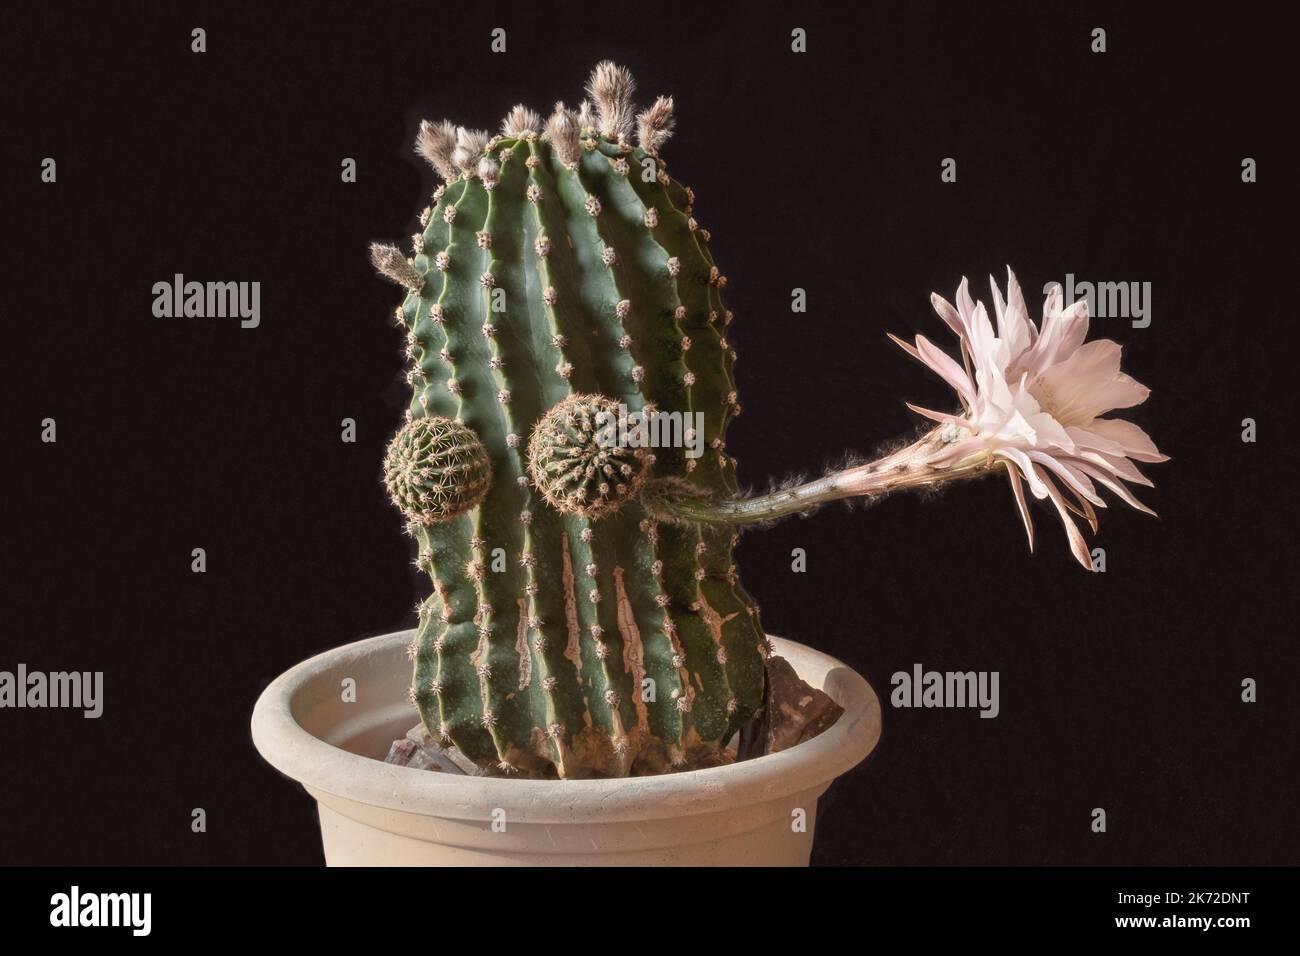 Funny looking Easter Lily Echinopsis eyriesii cactus with one beautiful six inch white and pink flower waving goodbye on a black background Stock Photo